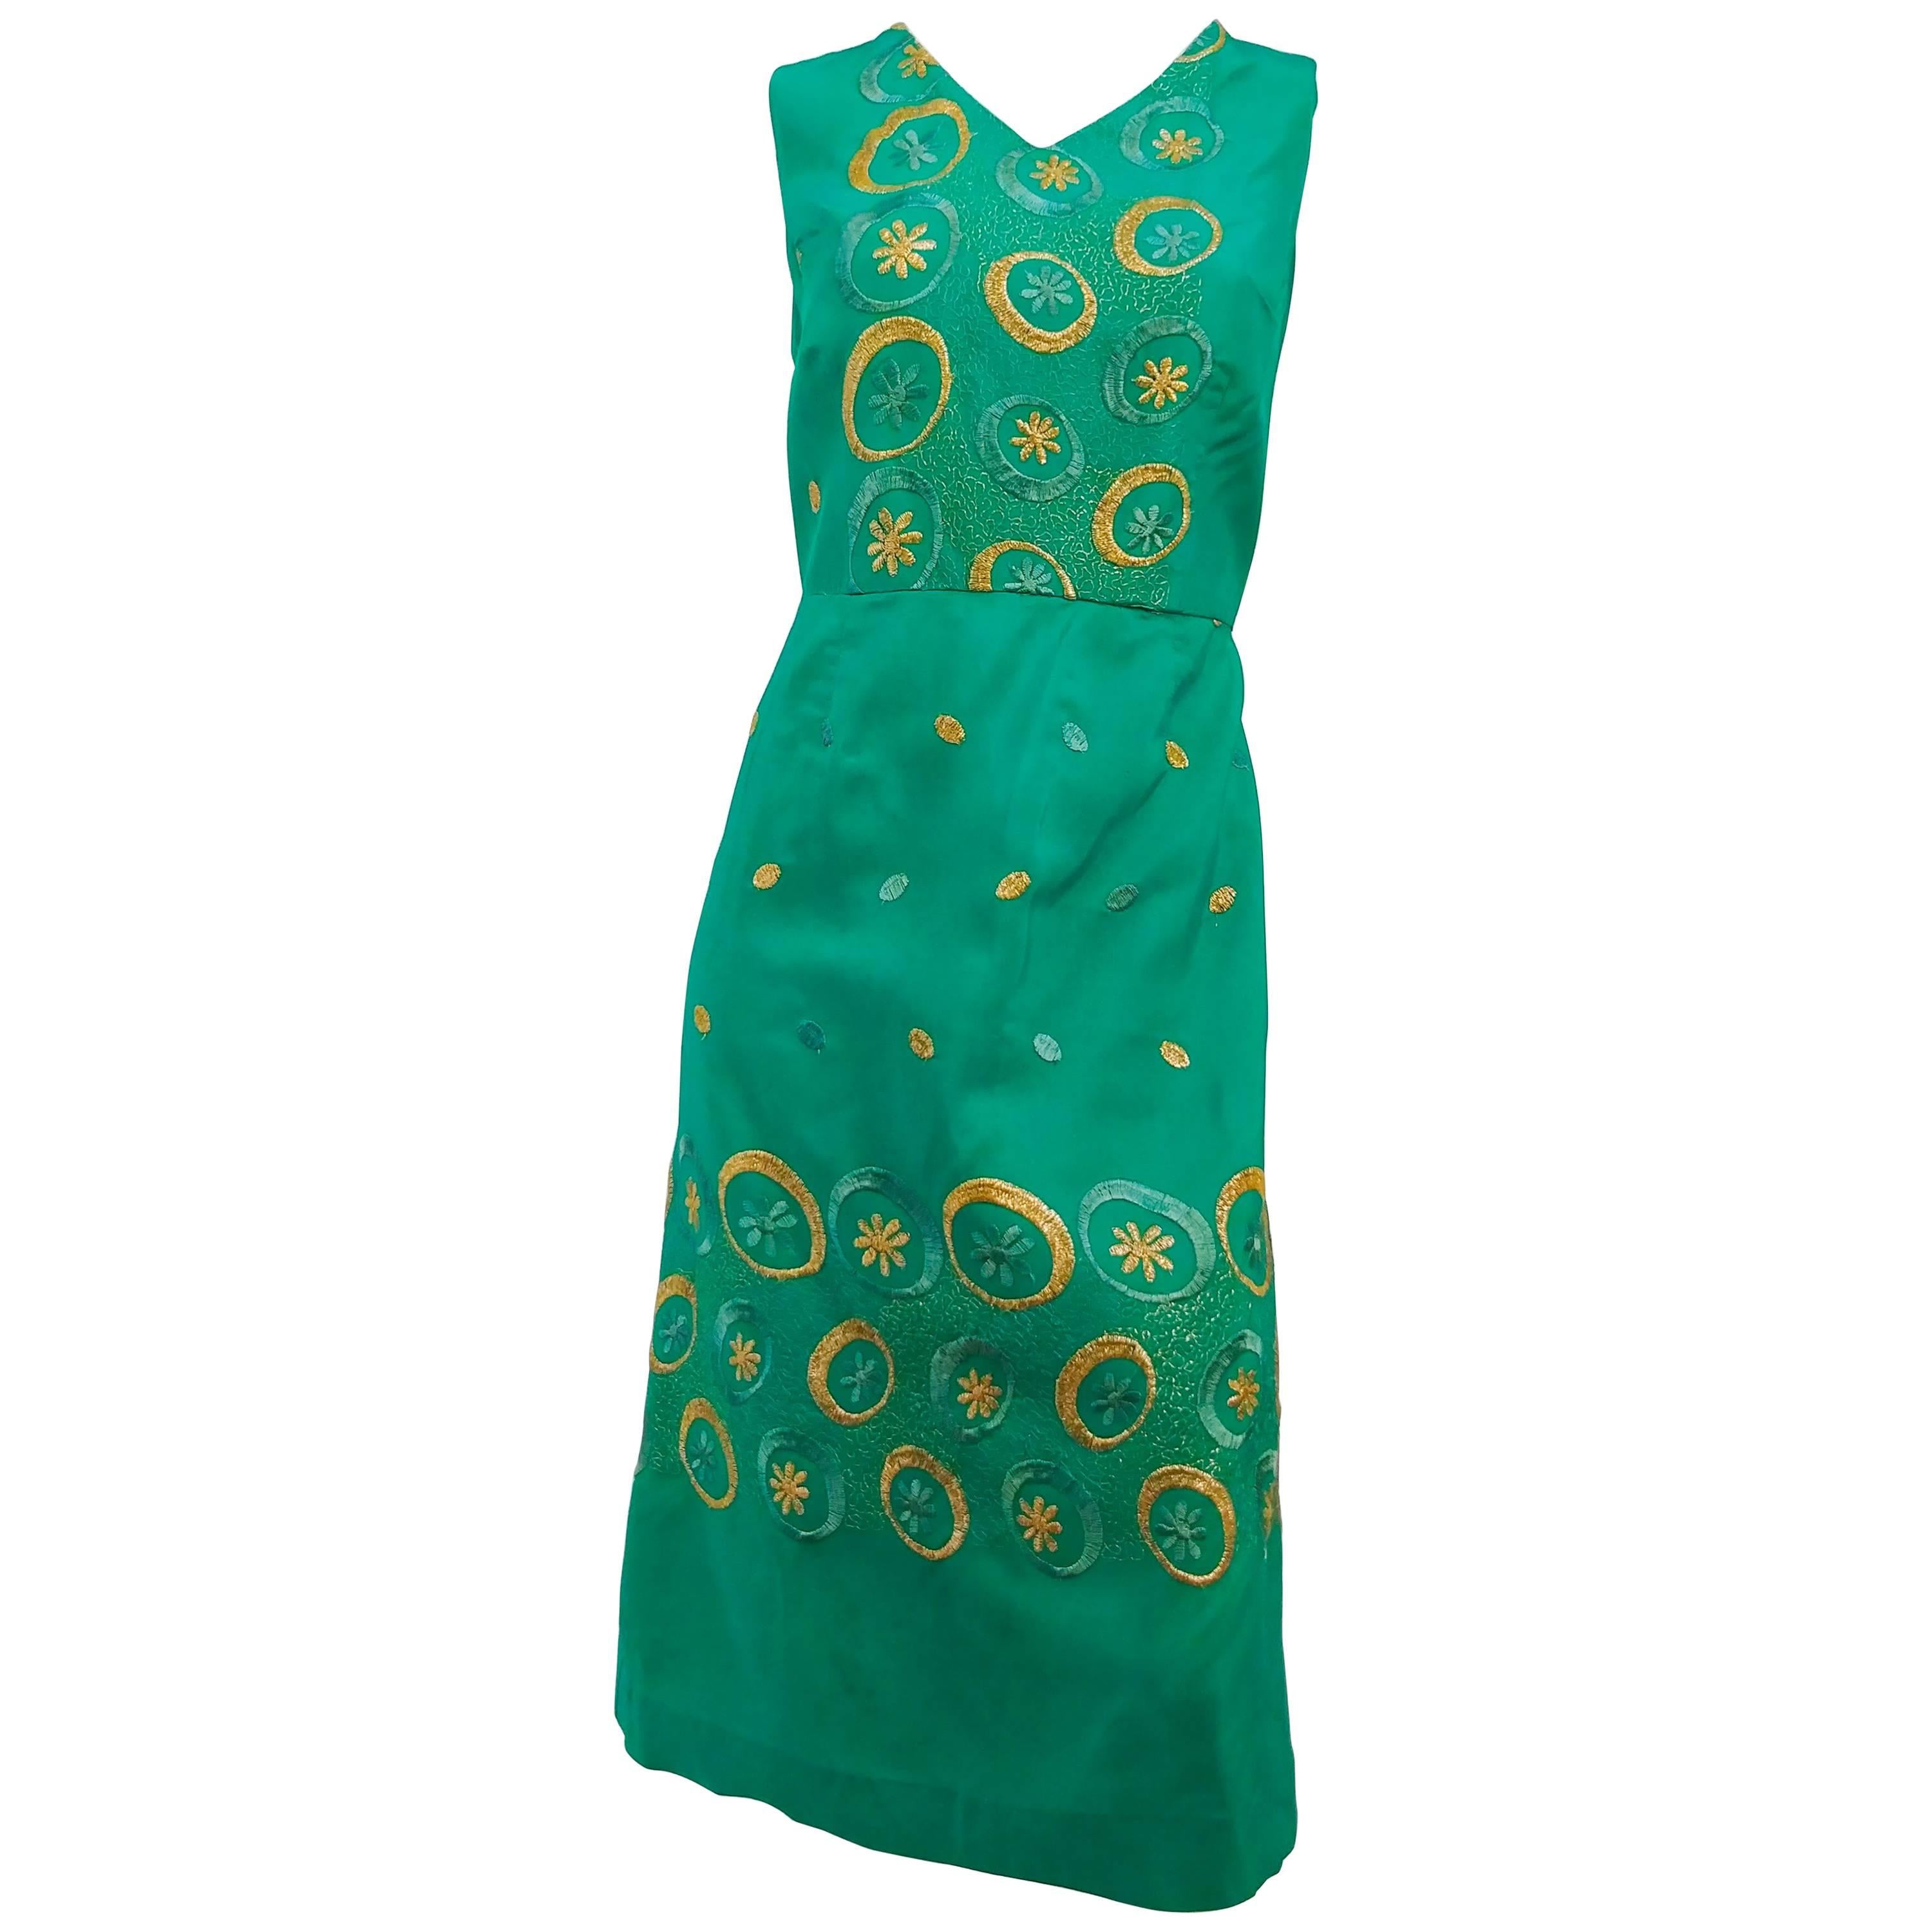 1960s Emerald Green Embroidered Cocktail Dress